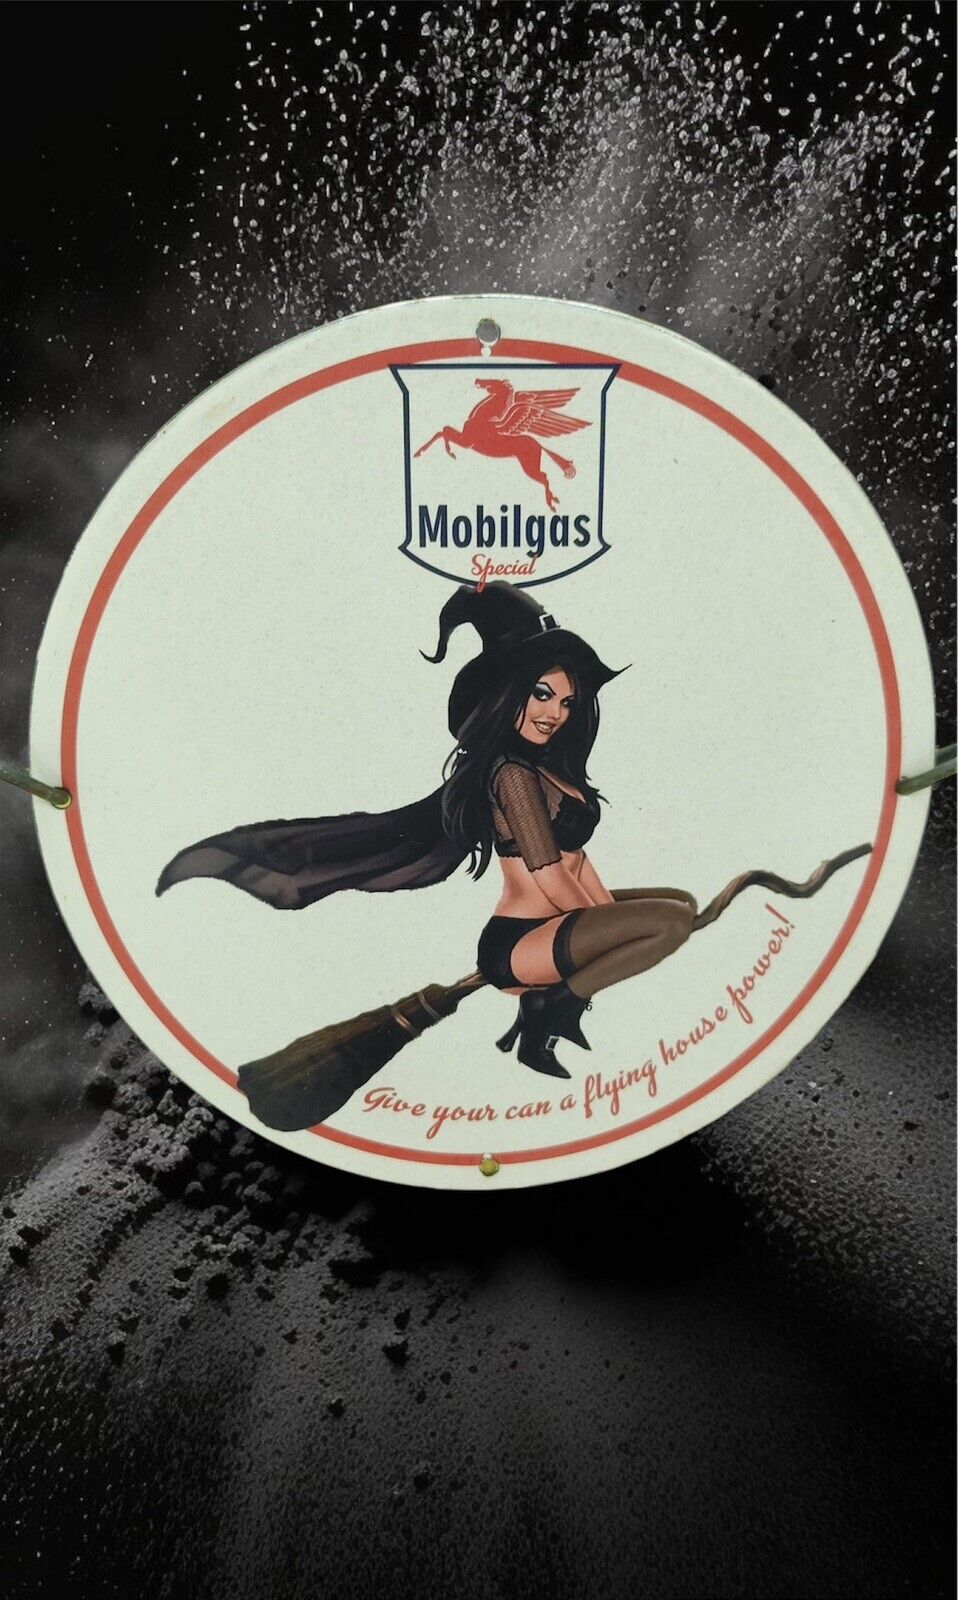 MOBILOIL SPECIAL PINUP WITCH BABE PORCELAIN GAS OIL SERVICE PUMP PLATE AD SIGN